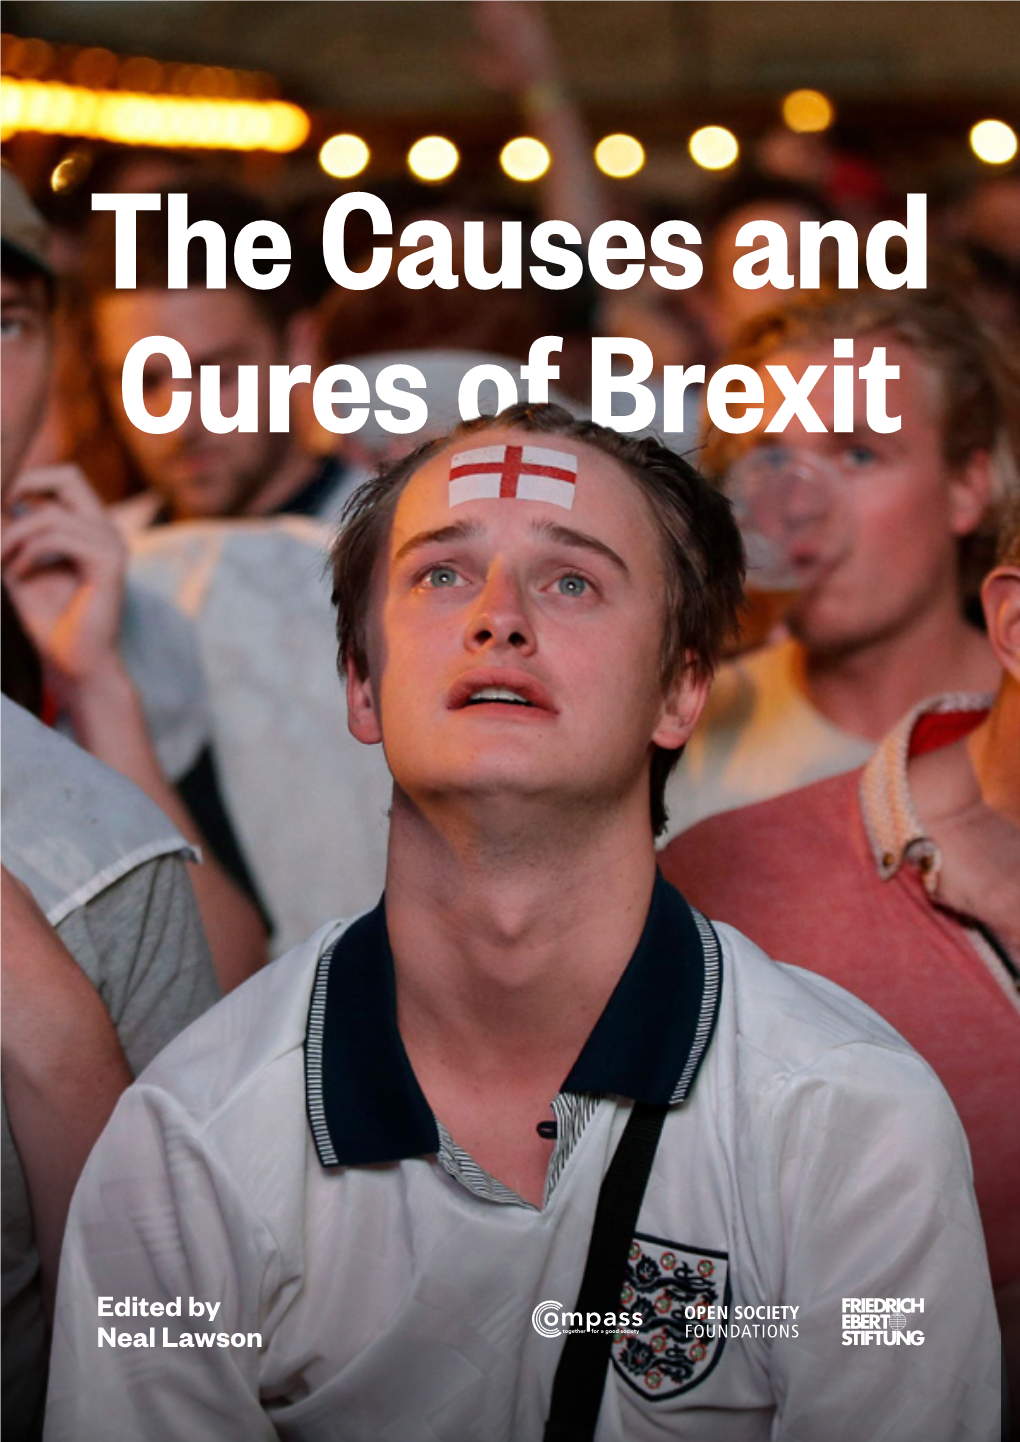 The Causes and Cures of Brexit